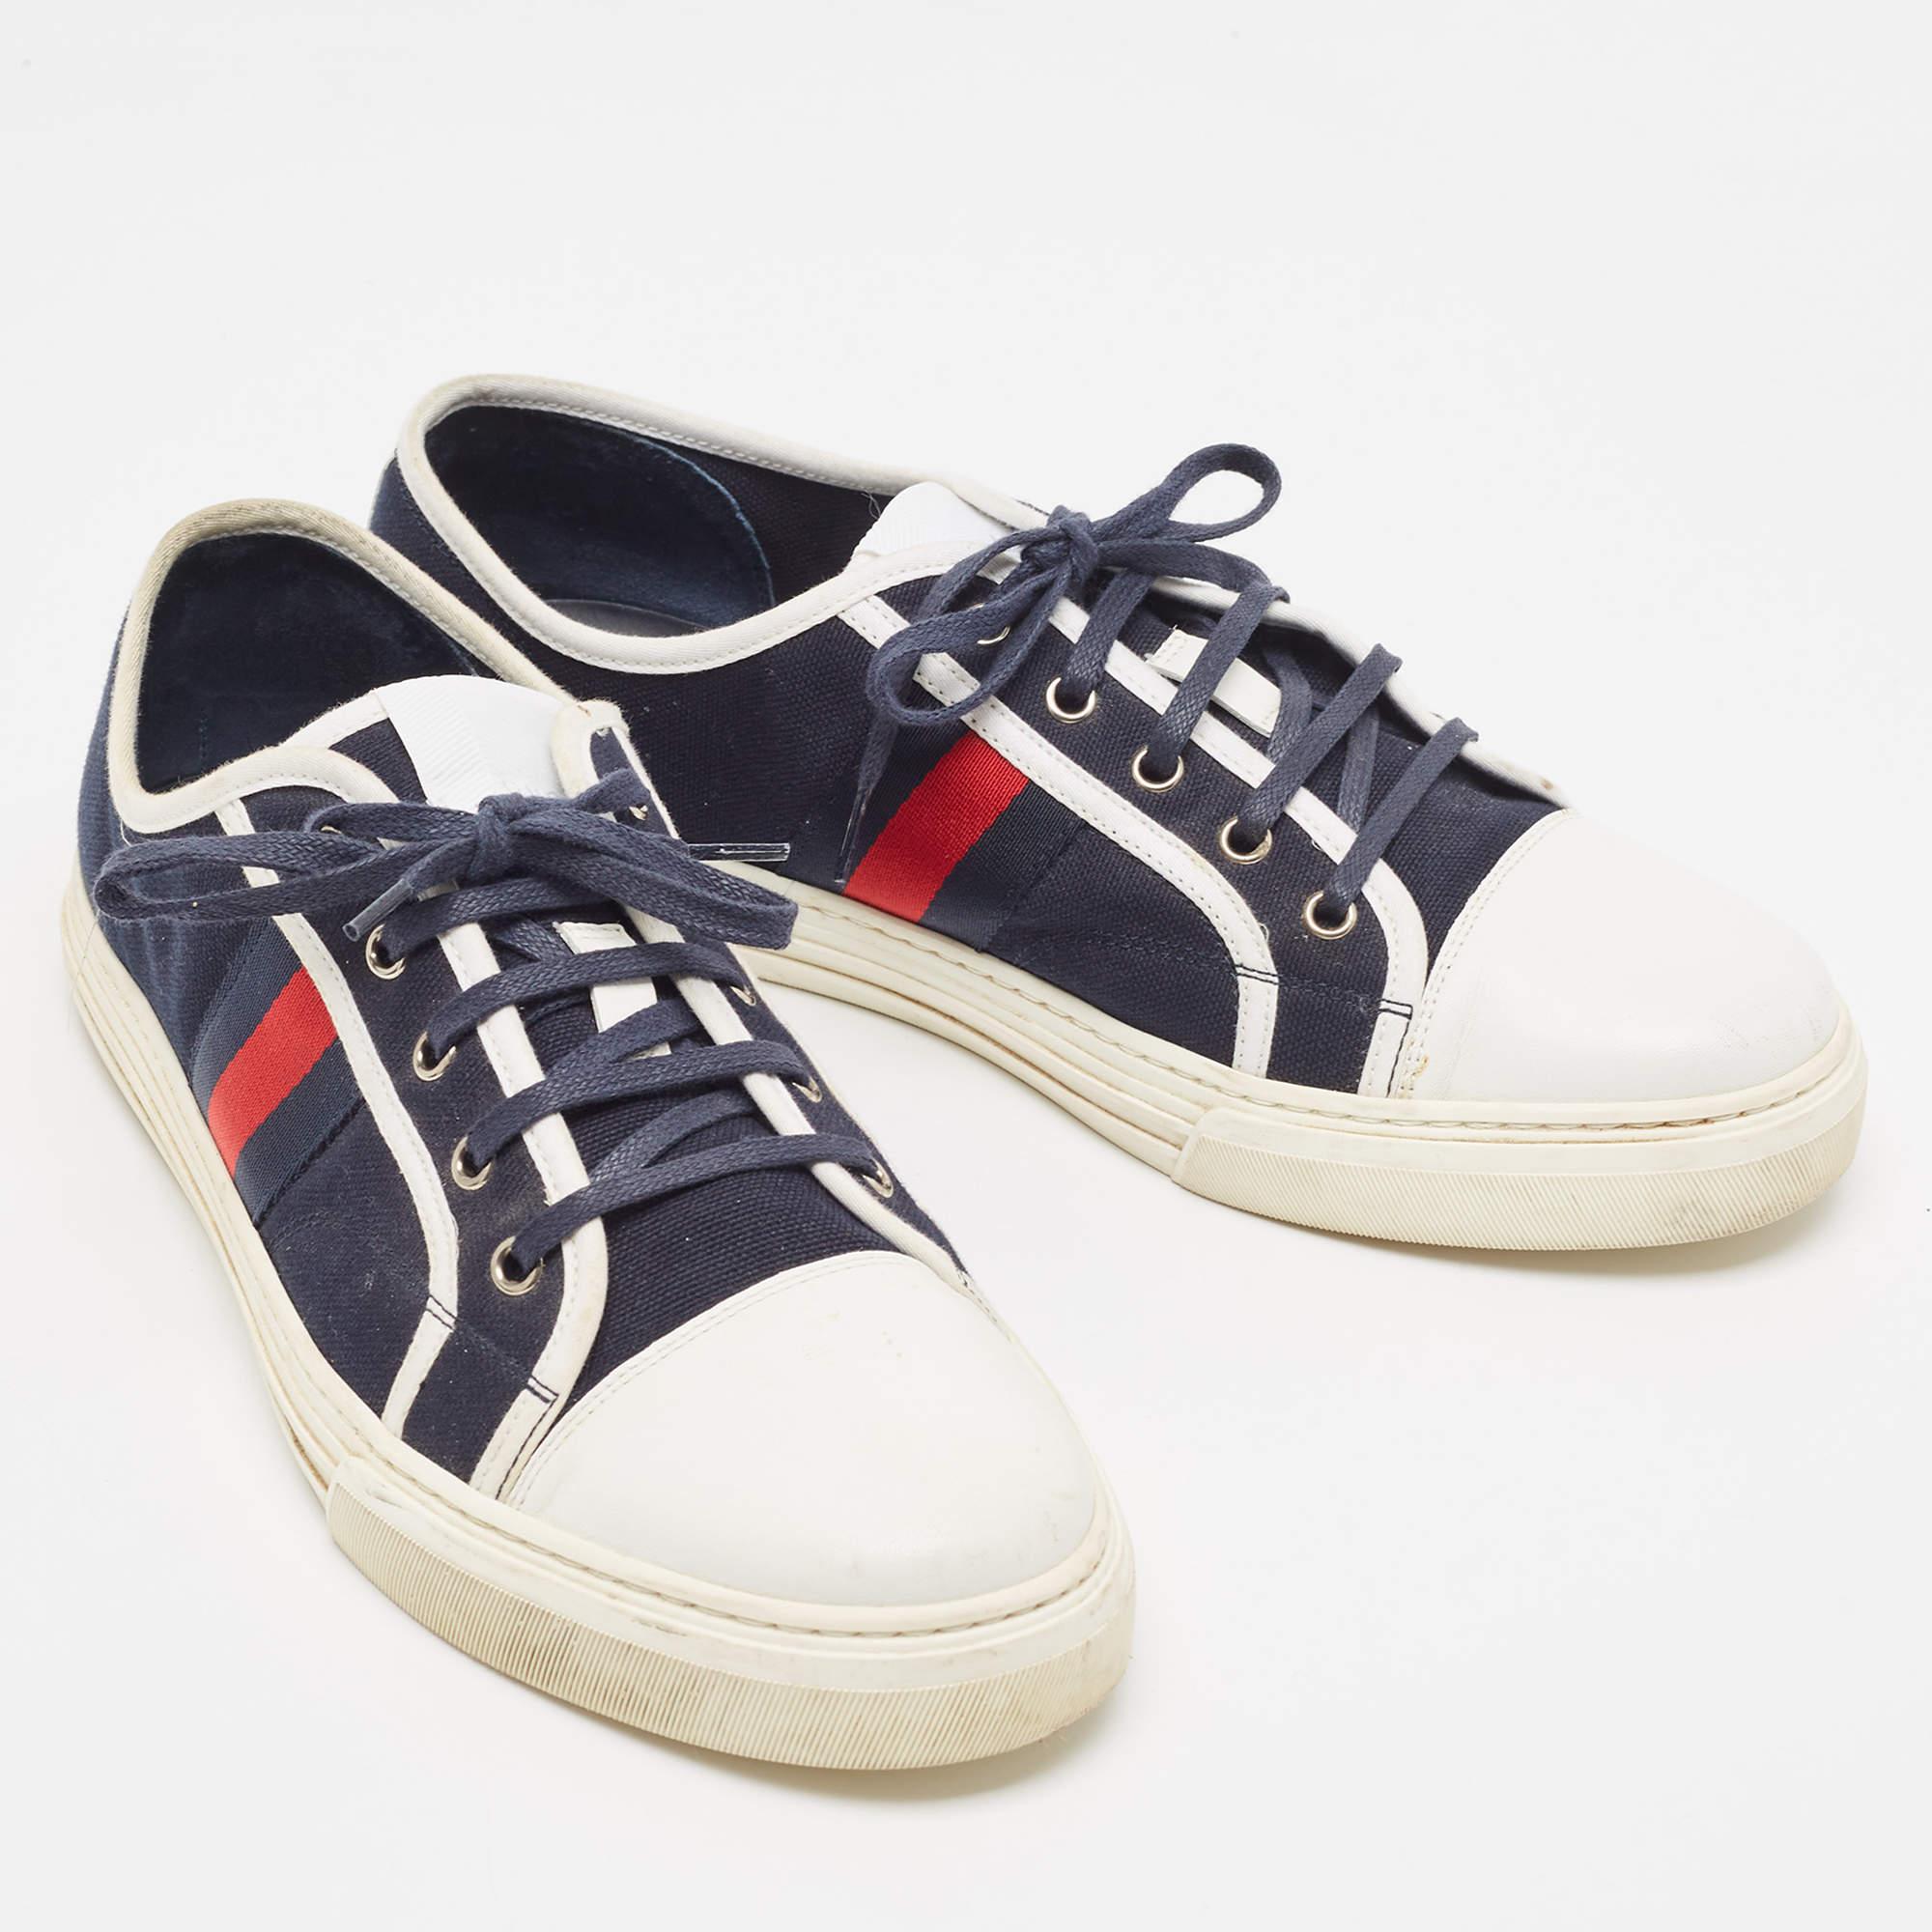 Gucci Navy Blue Canvas And Leather Web Detail Lace Up Sneakers Size 44.5 In Good Condition For Sale In Dubai, Al Qouz 2